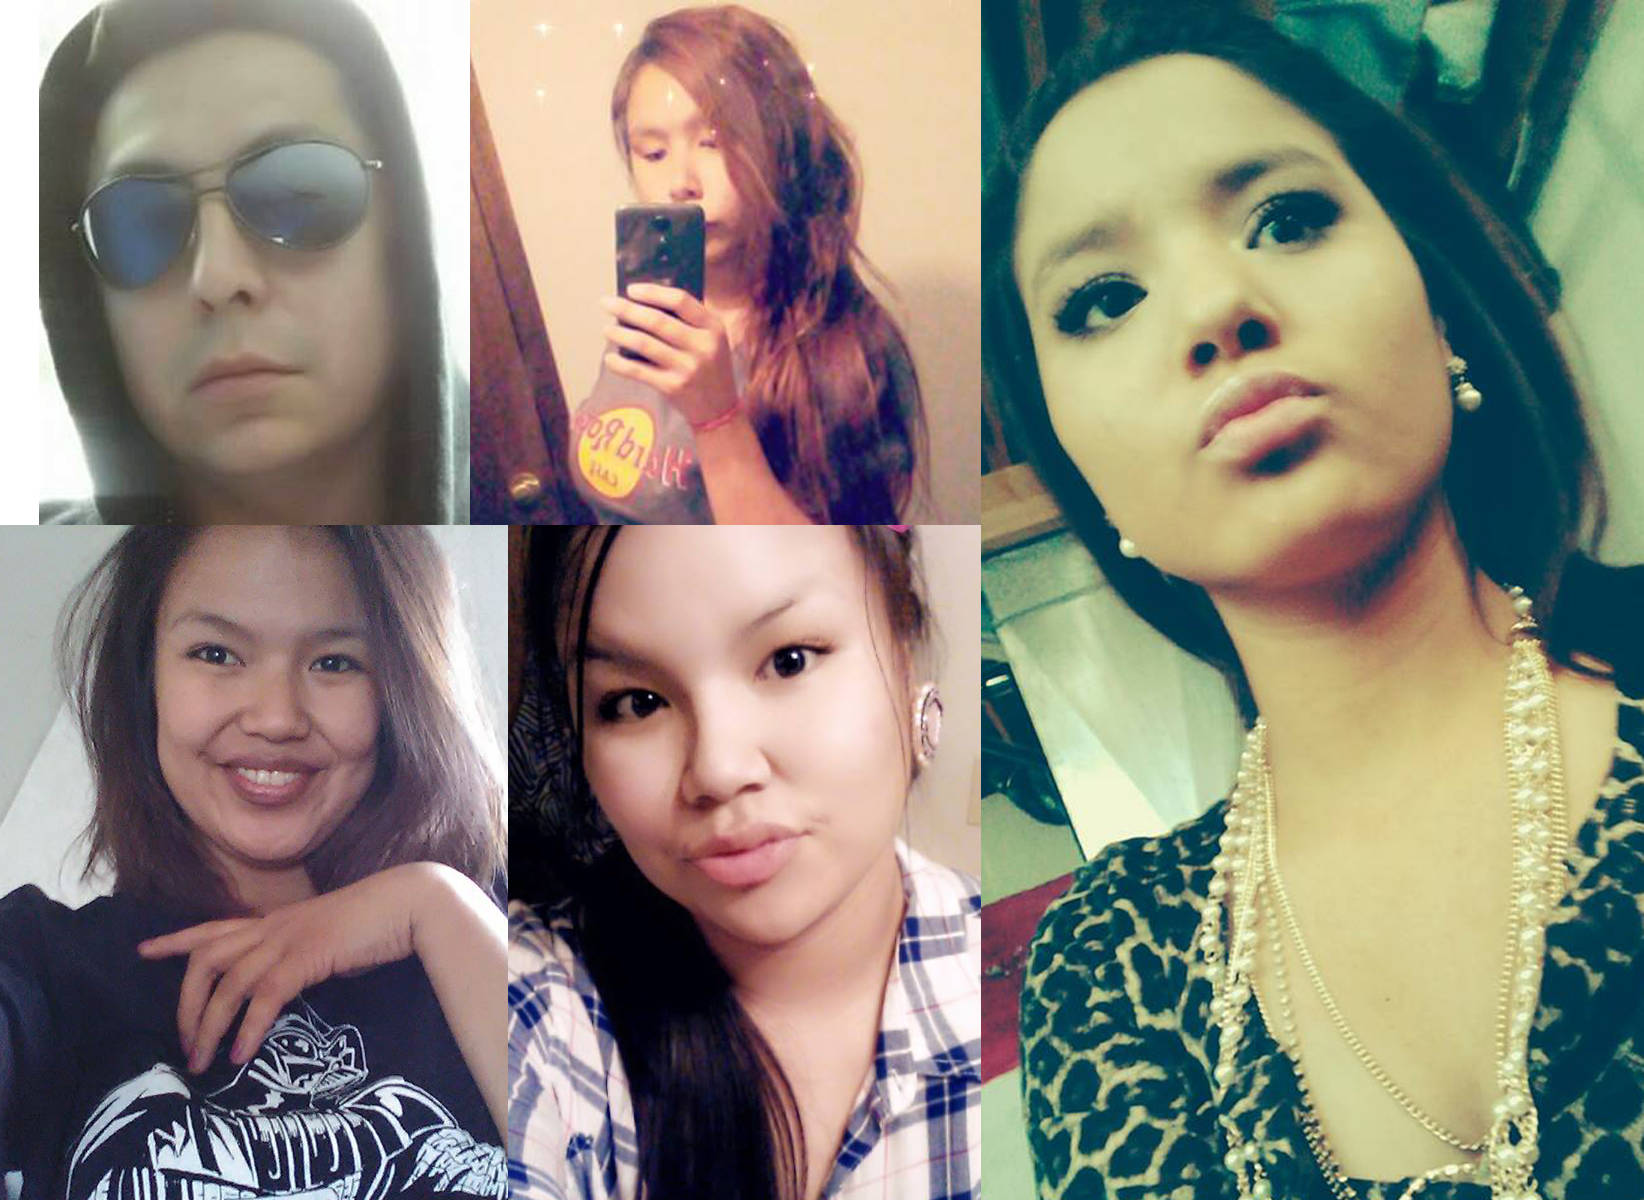 Samson Cree Nation Chief Vern Saddleback spoke to the press about the sadness that the accident has caused in the community. Photos: Top (l-r) Anthony Swampy, Dominique Soosay Northwest and Terrelle Minde. Bottom photos: Cheyanne Soosay Northwest and Latesha Dawne. Facebook photos